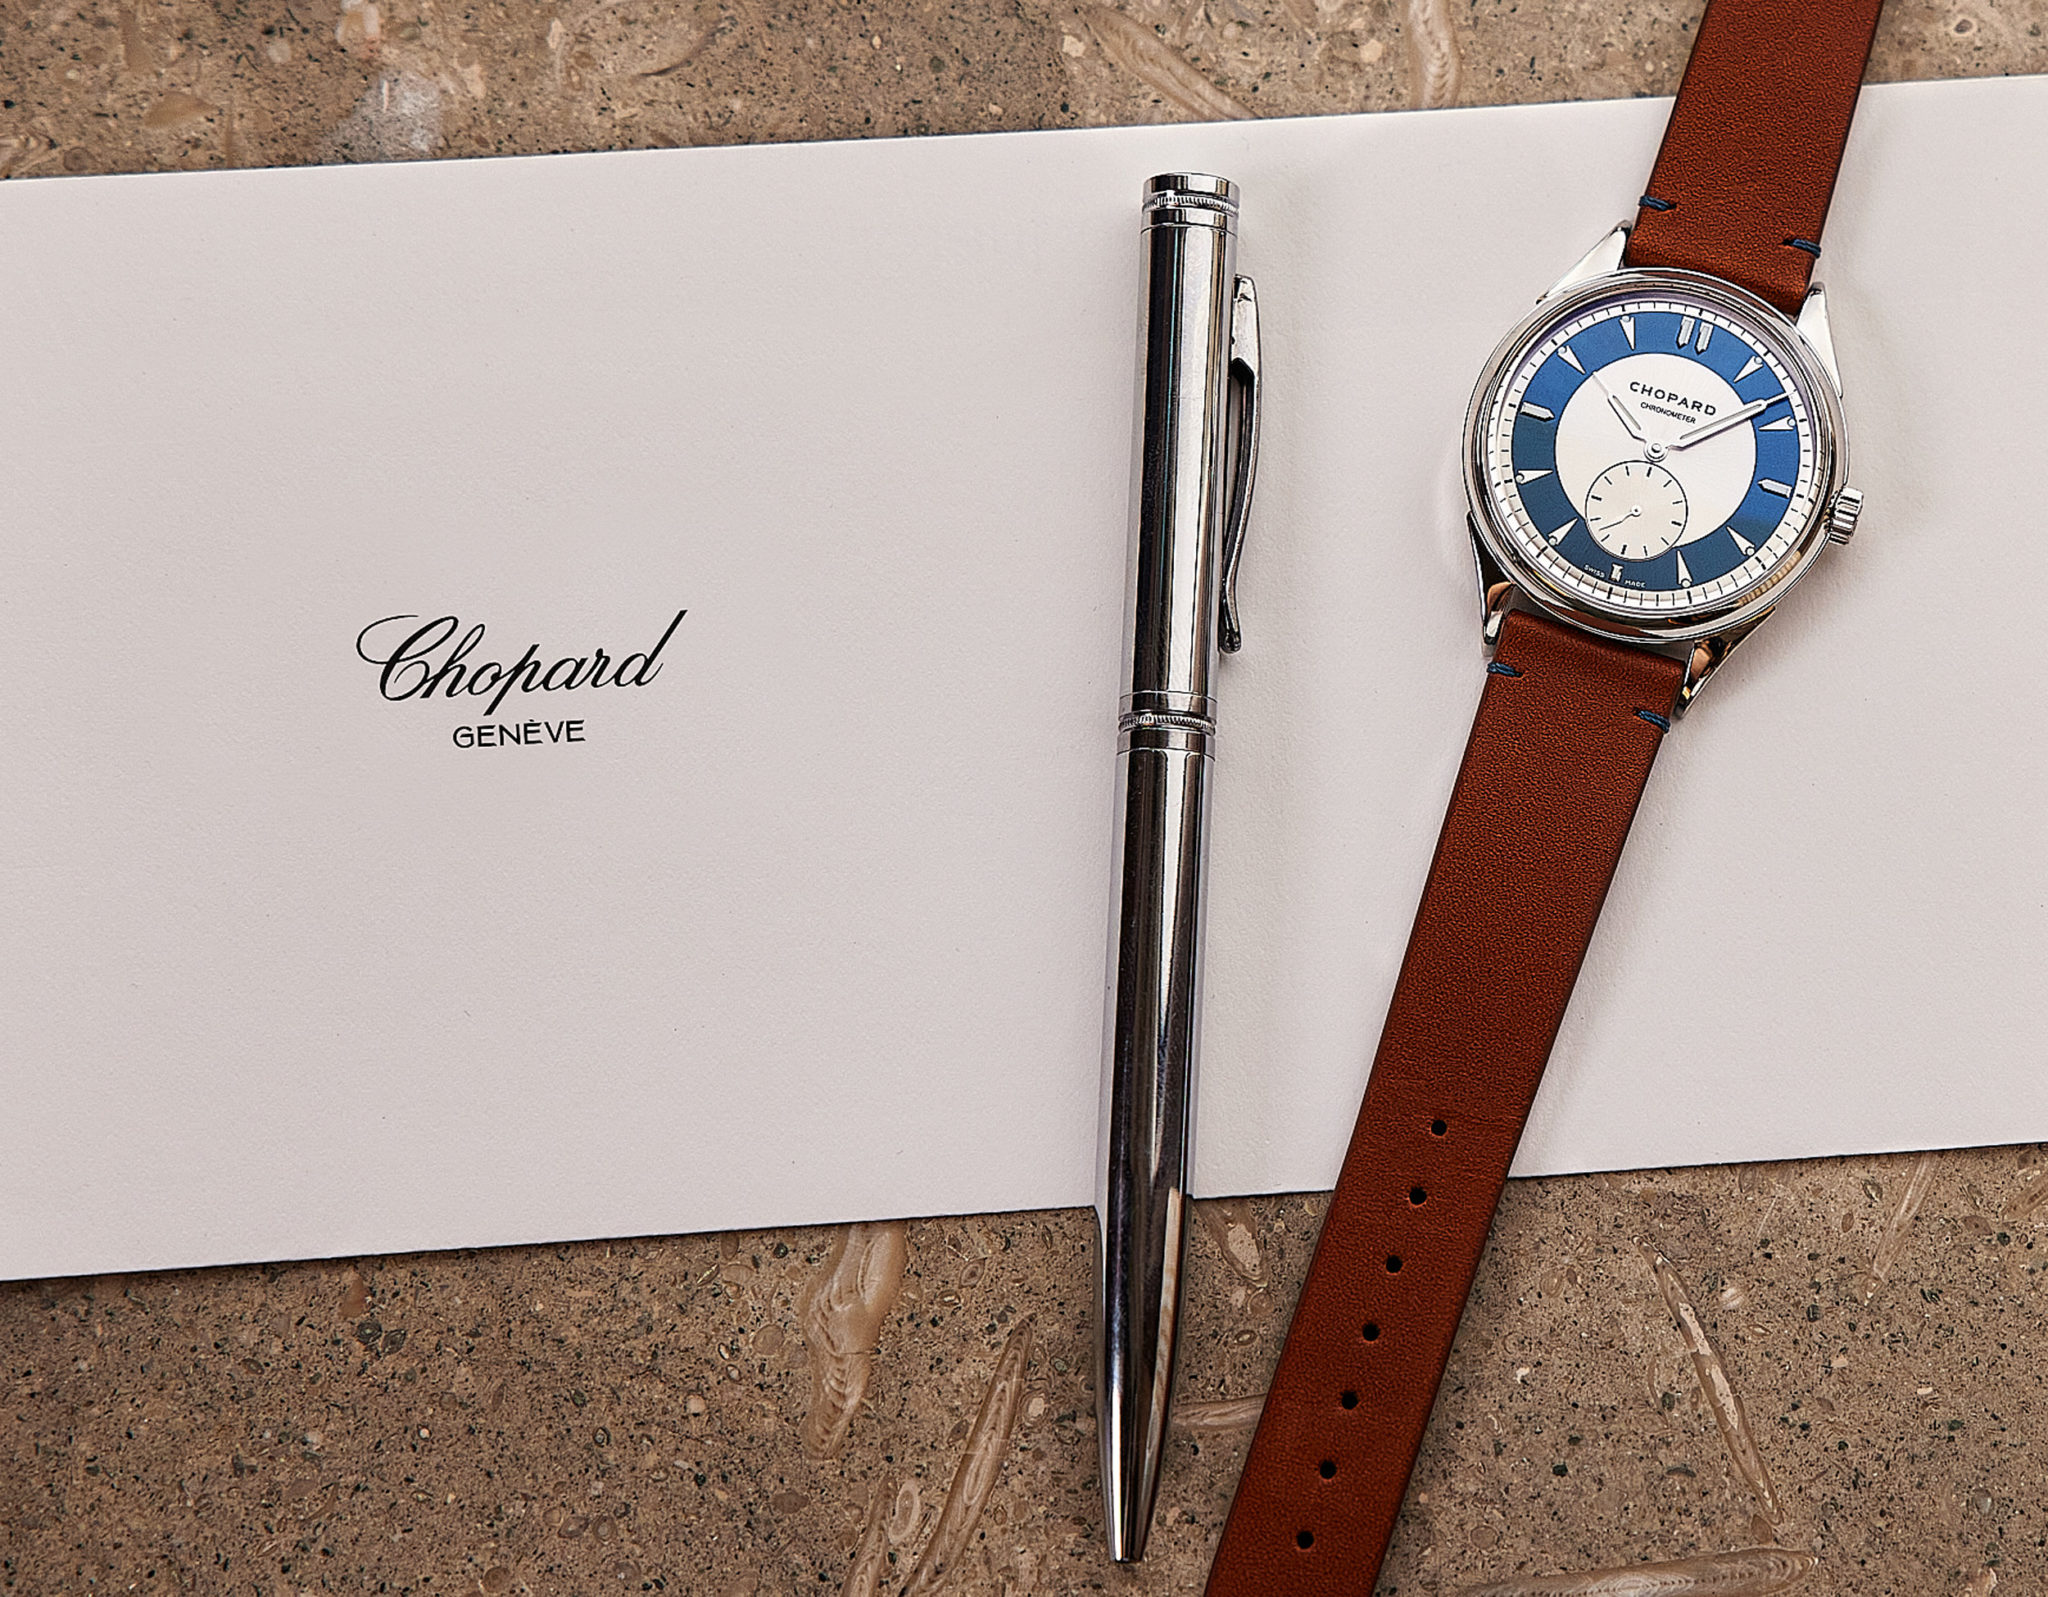 Chopard, 25 years of manufacturing independence